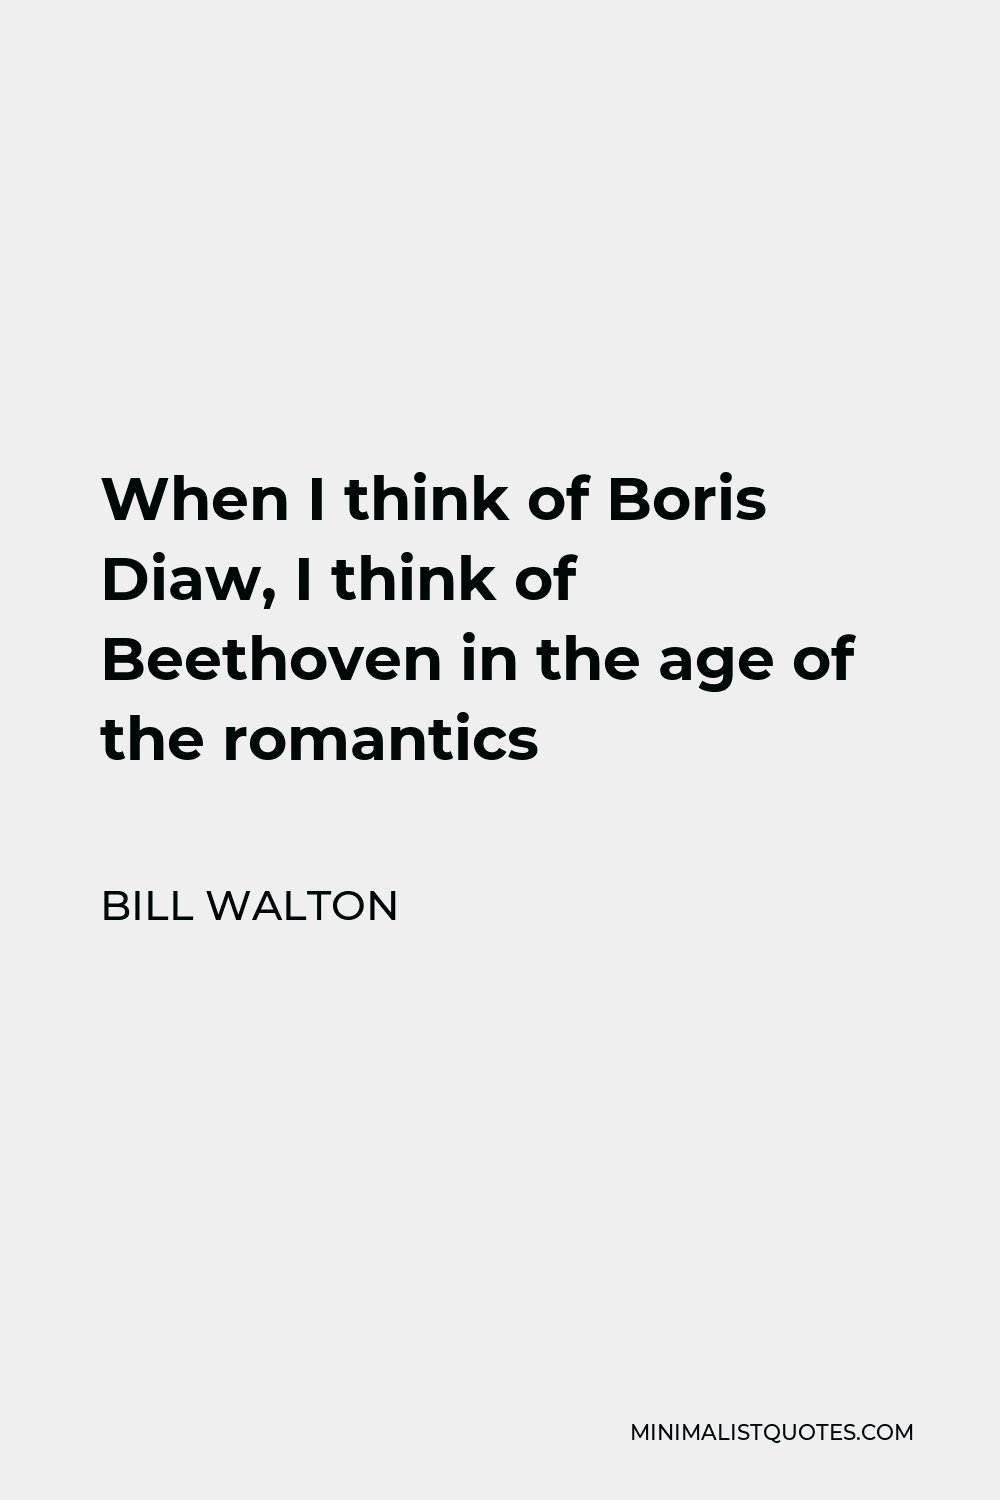 Bill Walton Quote - When I think of Boris Diaw, I think of Beethoven in the age of the romantics